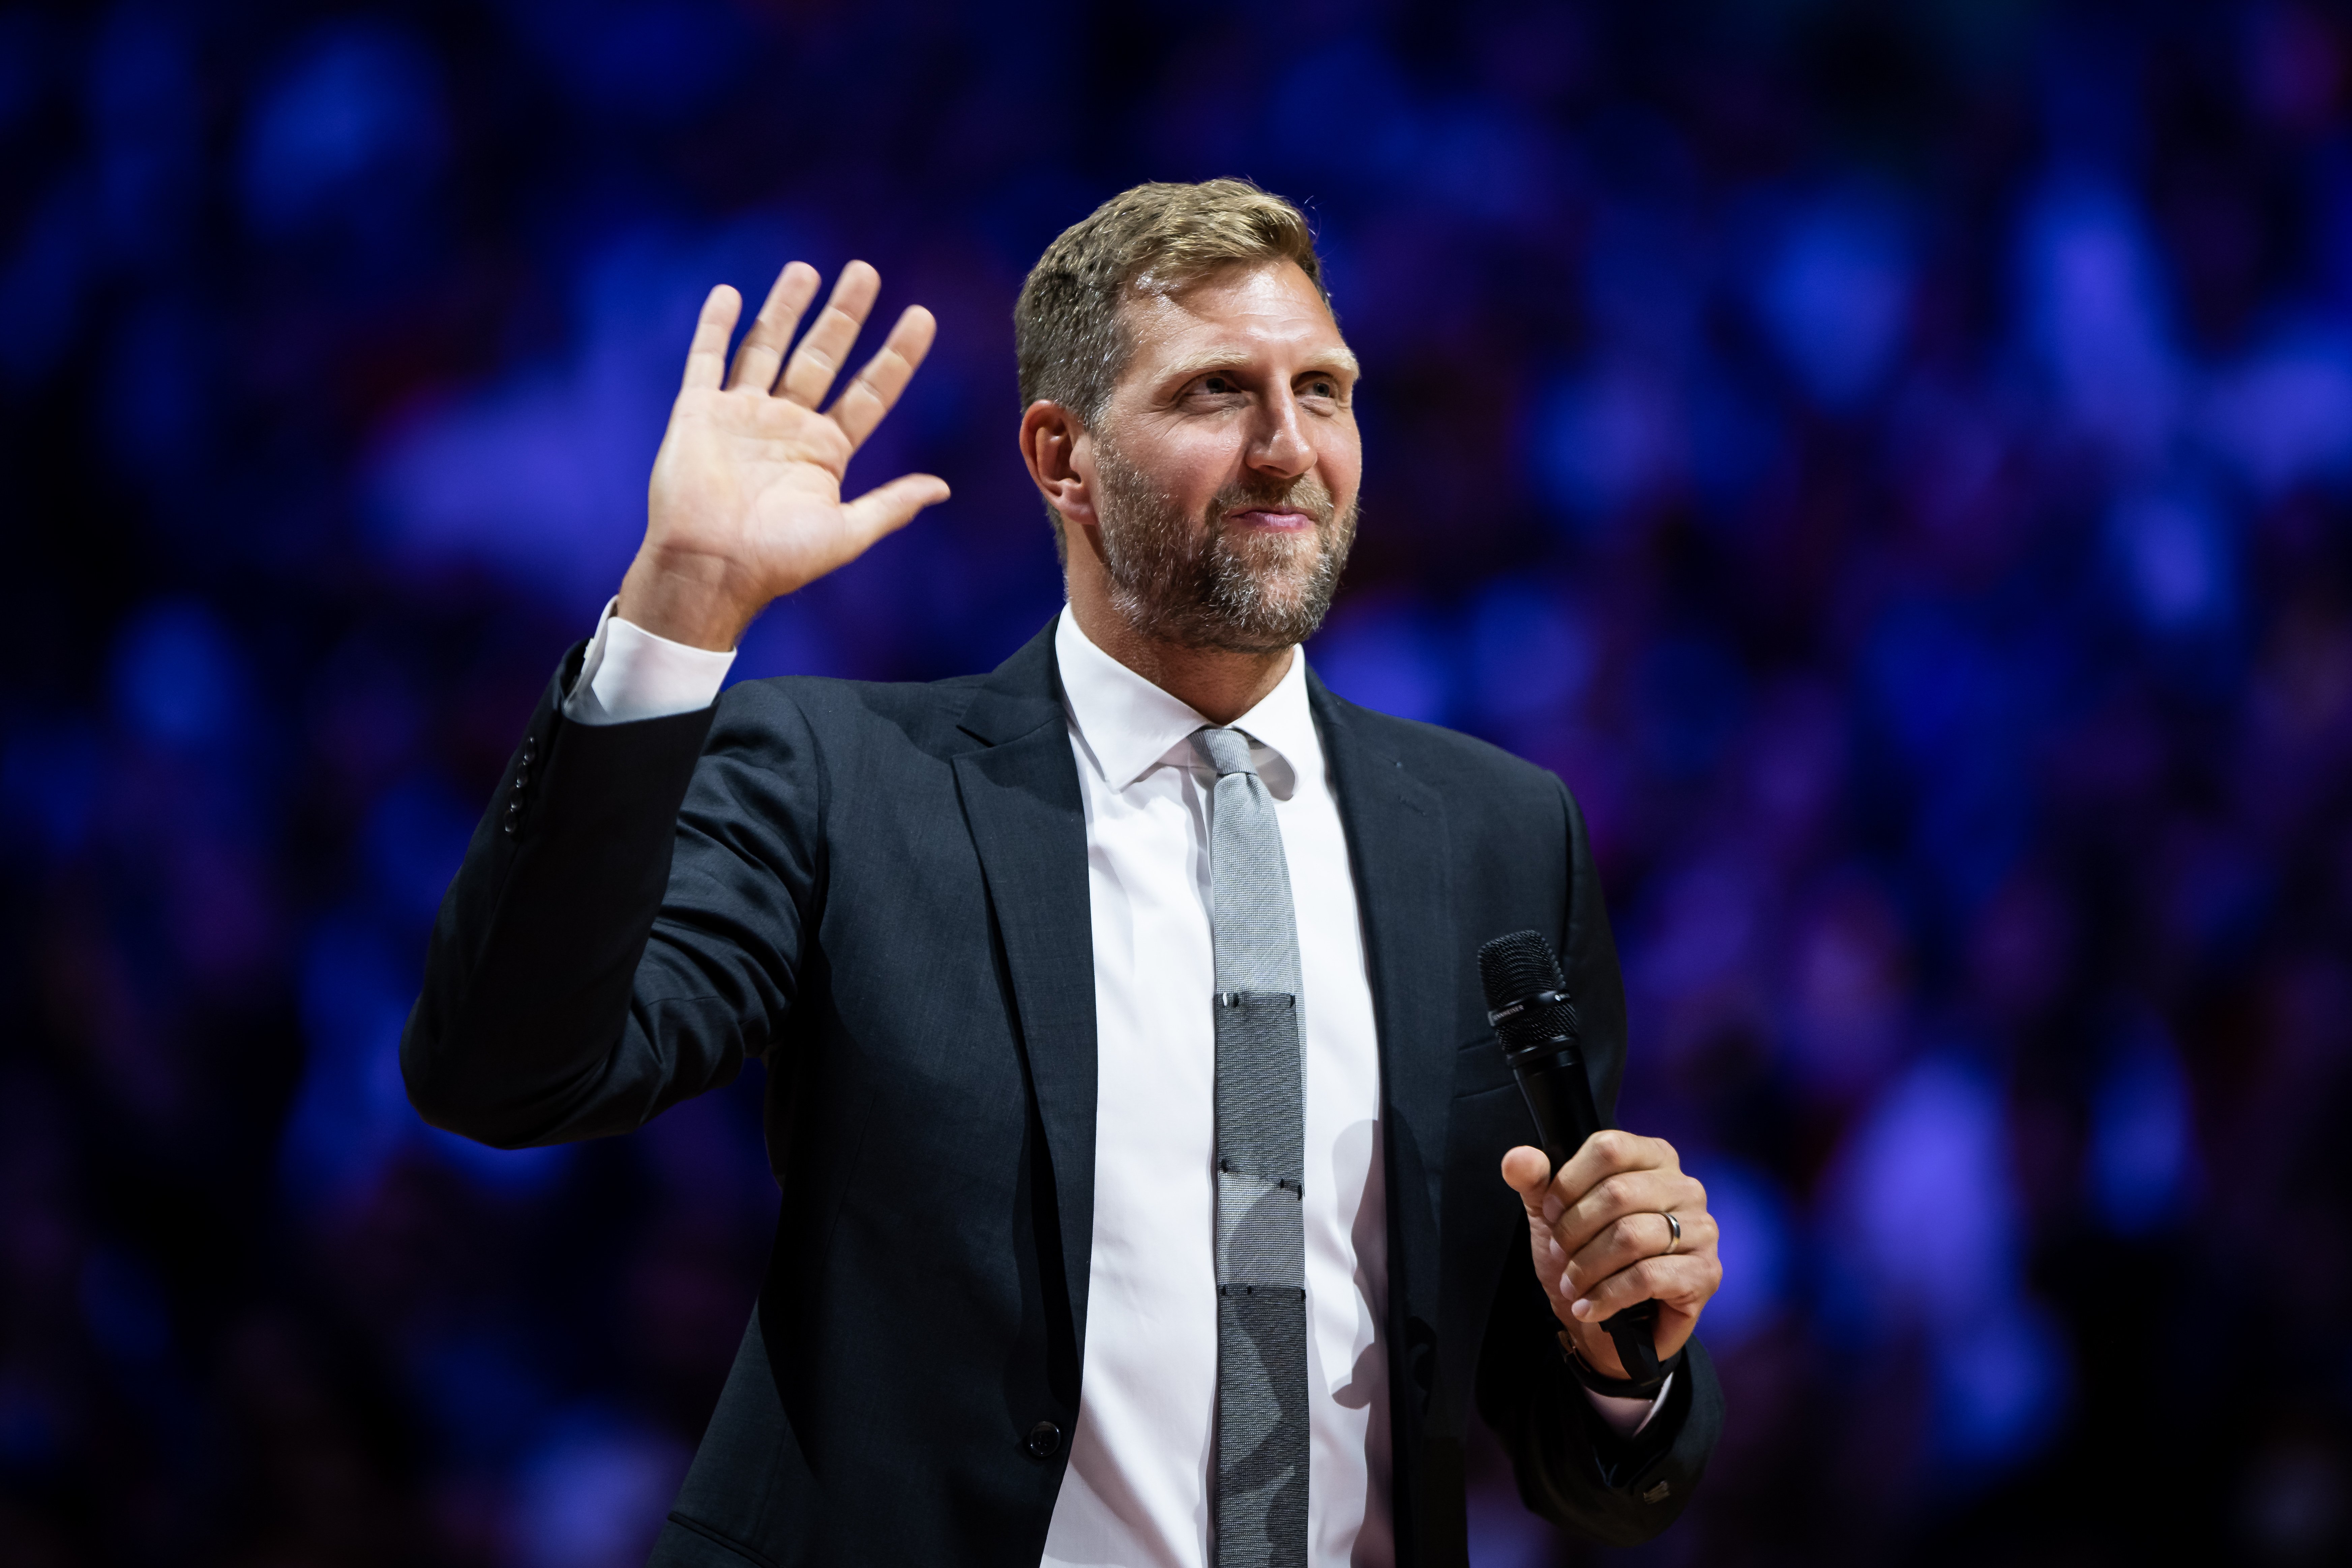 Dirk Nowitzki is pictured as he speaks during his jersey retirement prior to the FIBA EuroBasket 2022 group B match between France and Germany at Lanxess Arena on September 1, 2022, in Cologne, Germany | Source: Getty Images